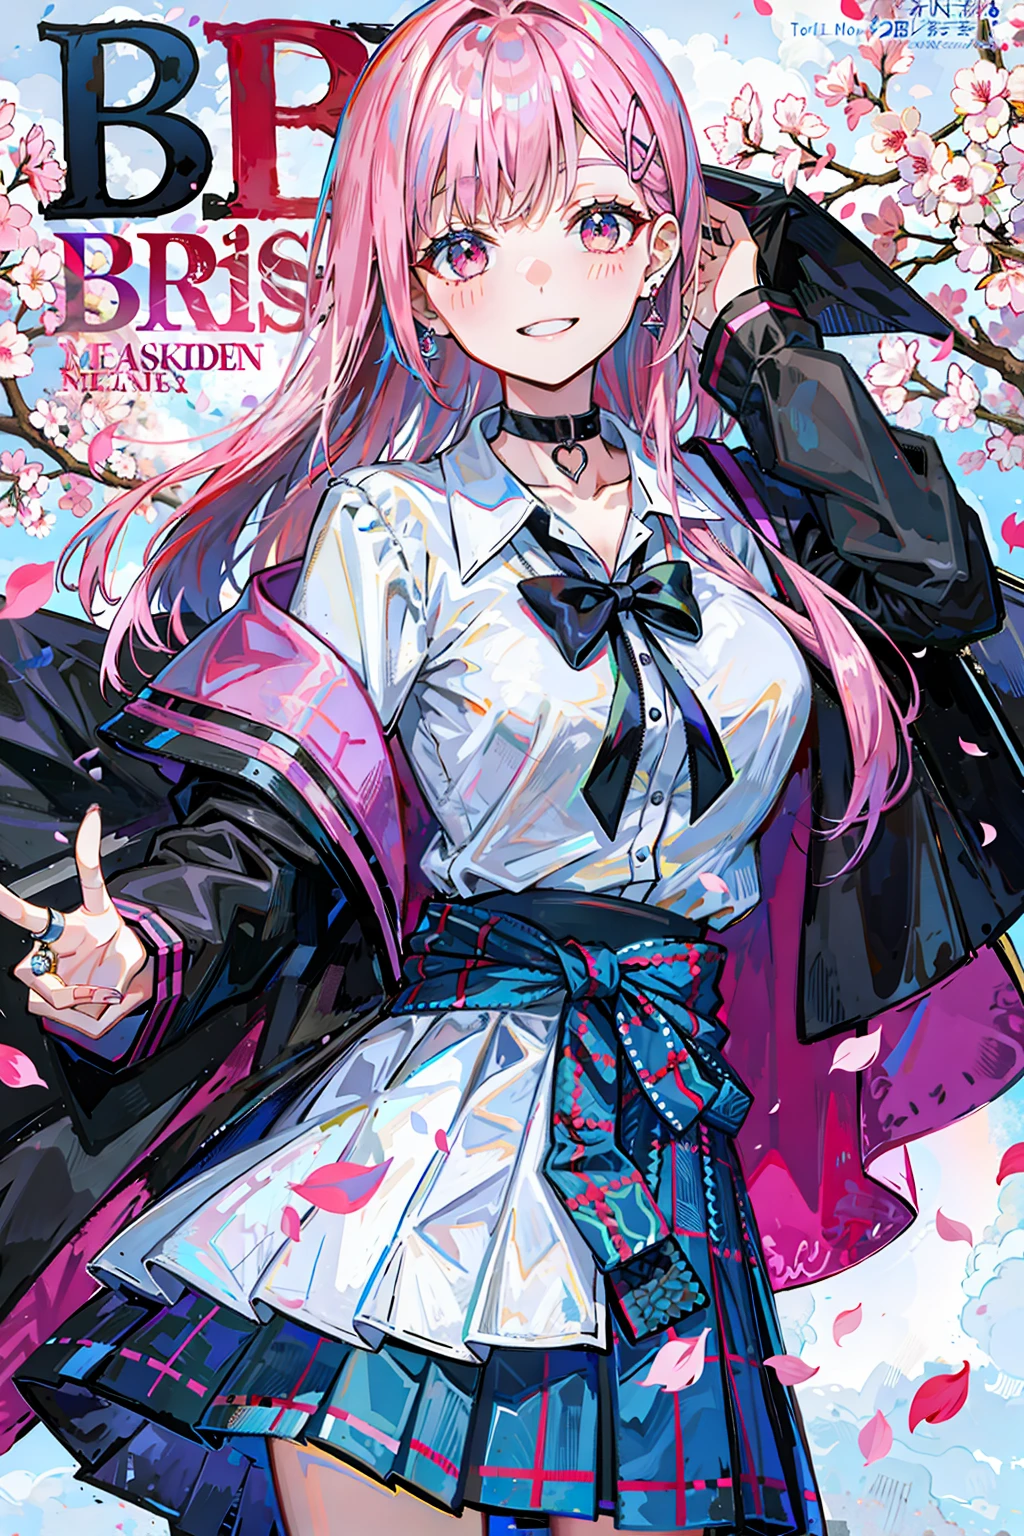 masterpiece, best quality, full body, 1girl, bangs, black choker, black tie, pink hair, blue skirt, blush, bracelet, large breasts, choker, clothes around the waist, collarbone, collar shirt, cowboy shot, dress shirt, ear piercing, eyebrows visible through hair, gradient hair, smile, gyaru, jewelry, kogal, long hair, looking at the viewer, loose tie, tie, piercing, plaid skirt, pleated skirt, red eyes, ring, , shirt, skirt, smile, solo, white shirt, street, sky, cherry blossoms, petals, illustration, (magazine: 1.3), (cover style: 1.3), elegant, woman, vibrant, clothing, posing, frontal, colorful, dynamic, background, elements, confident, expression, holding, statement, accessory, majestic, rolled, around, touch, scene, text, cover, bold, eye-catching, title, stylish, font, catchy, headline, bigger, impressive, modern, fashionable, focus, fashion,